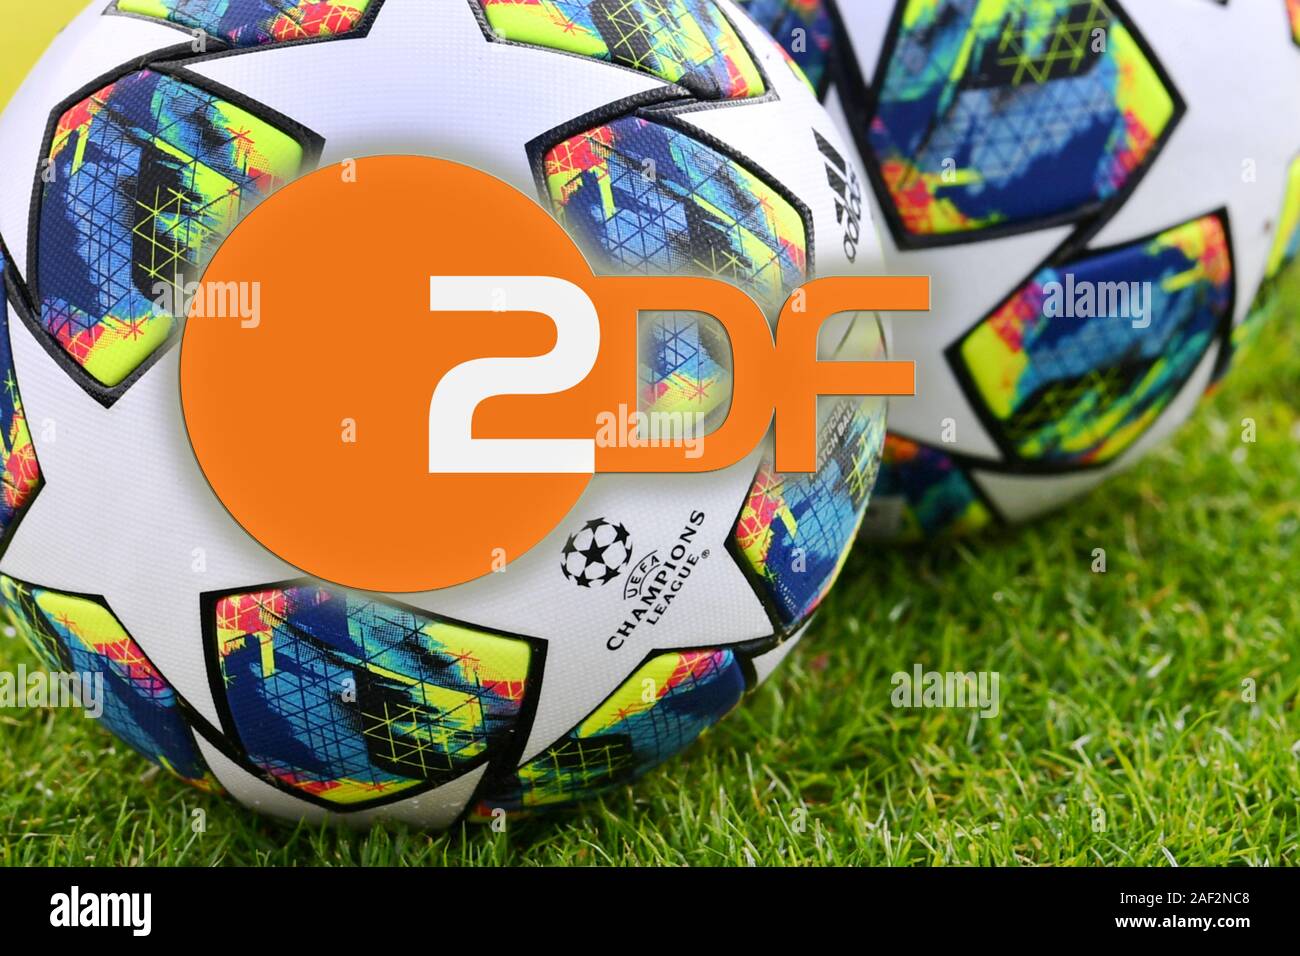 Close Up Of Adidas Champions League Final Football High Resolution Stock  Photography and Images - Alamy